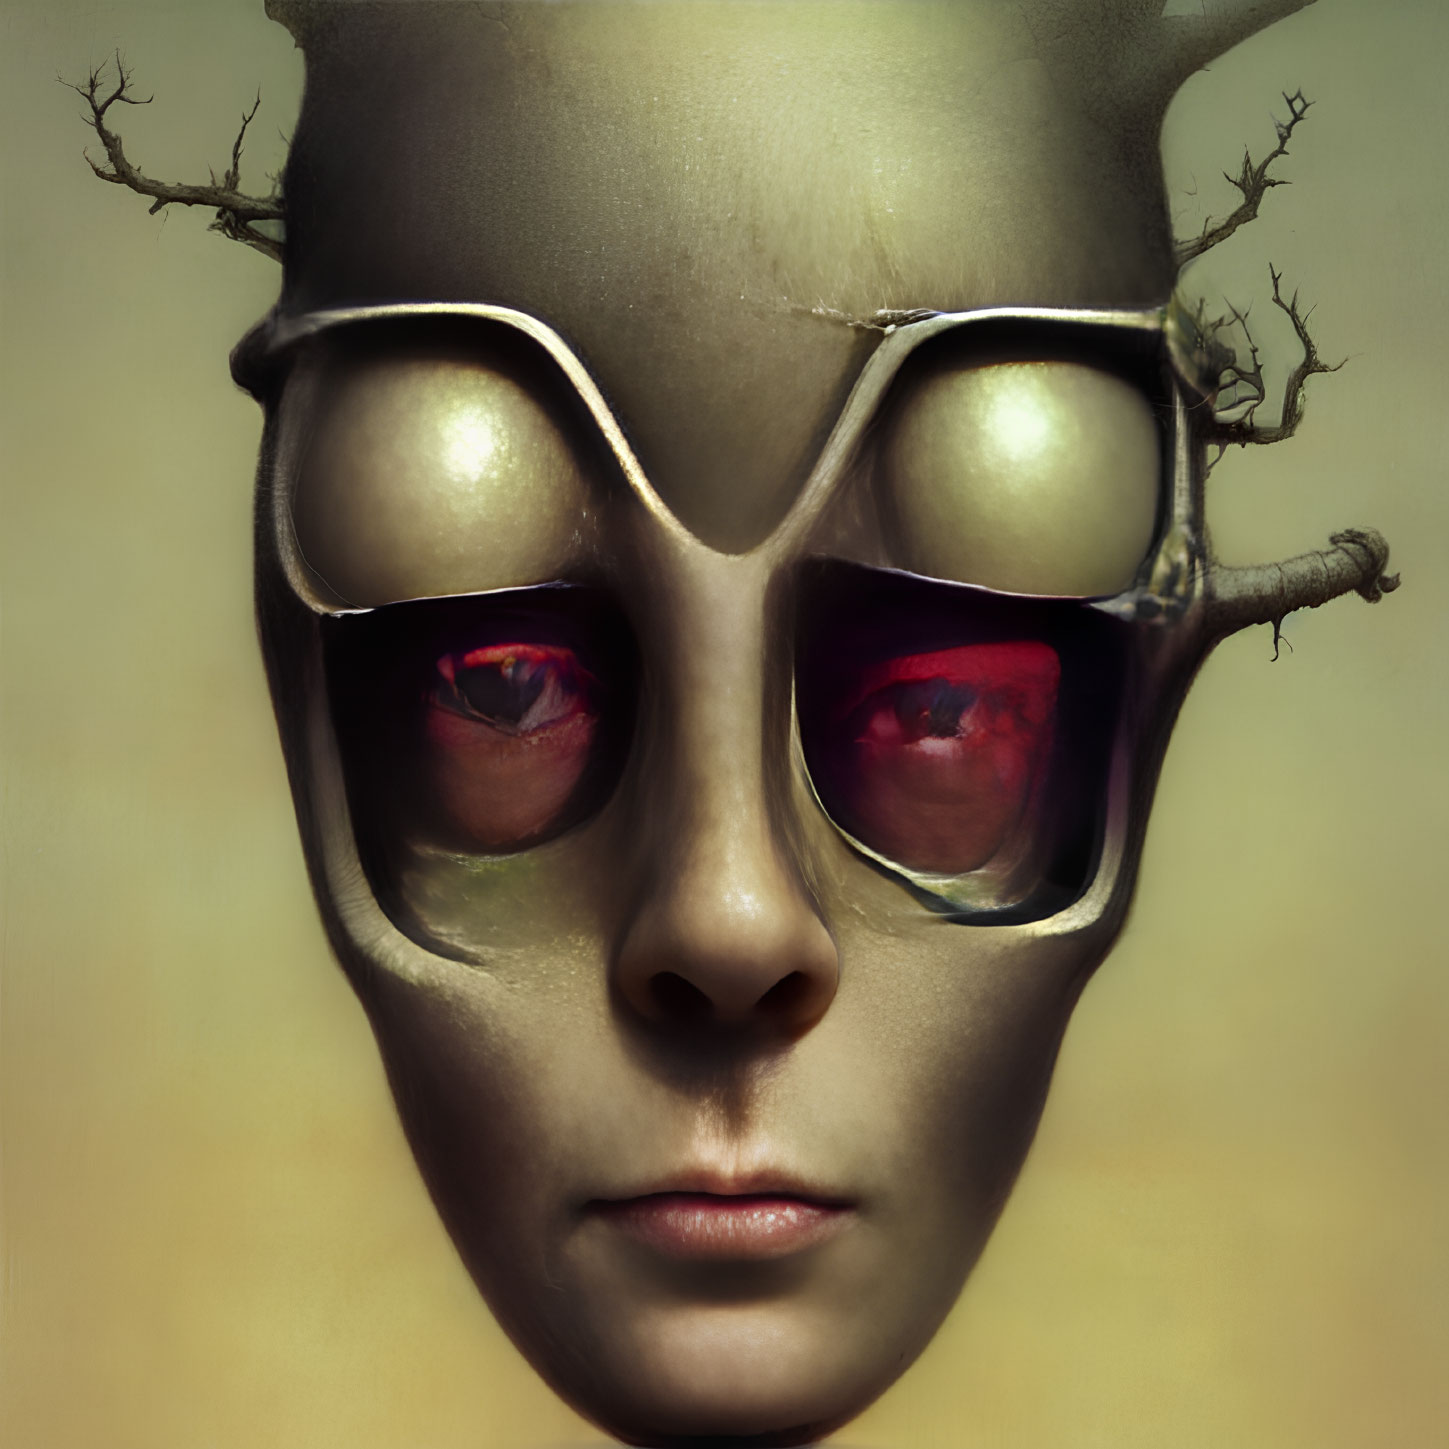 Surreal portrait of face with metallic mask, branch protrusions, and red eyes